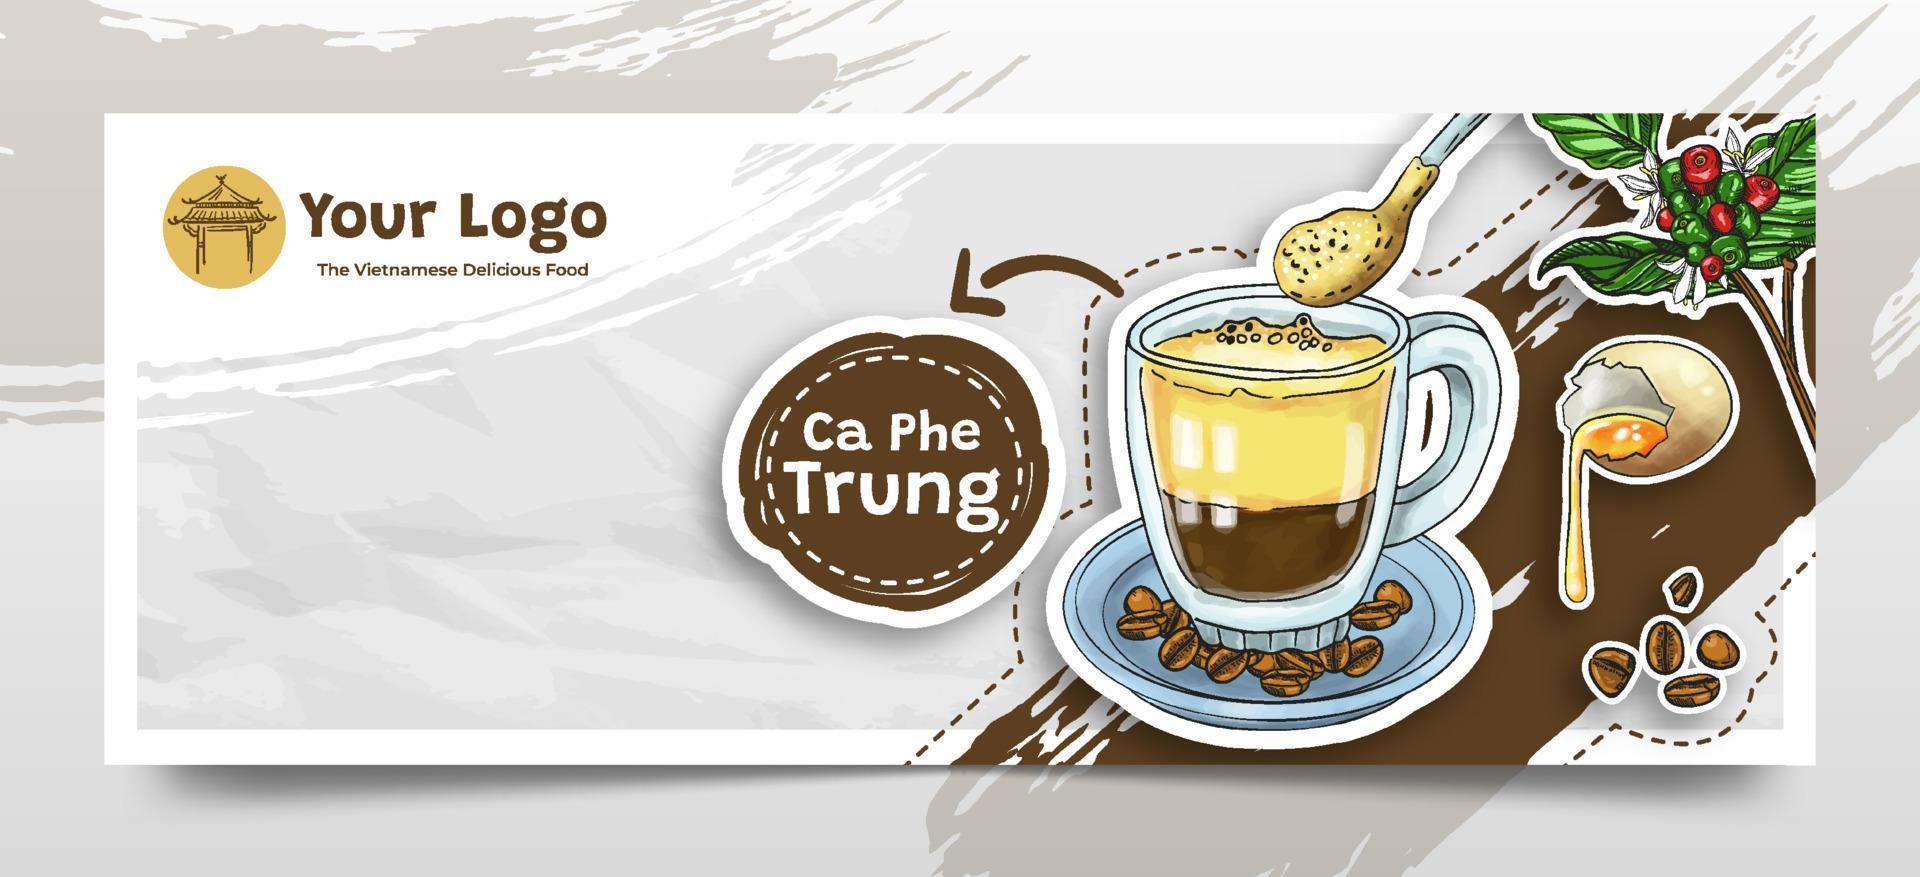 Doodle Hand Drawn Ca Phe Trung as The Vietnamese Food Social Media Header Background vector